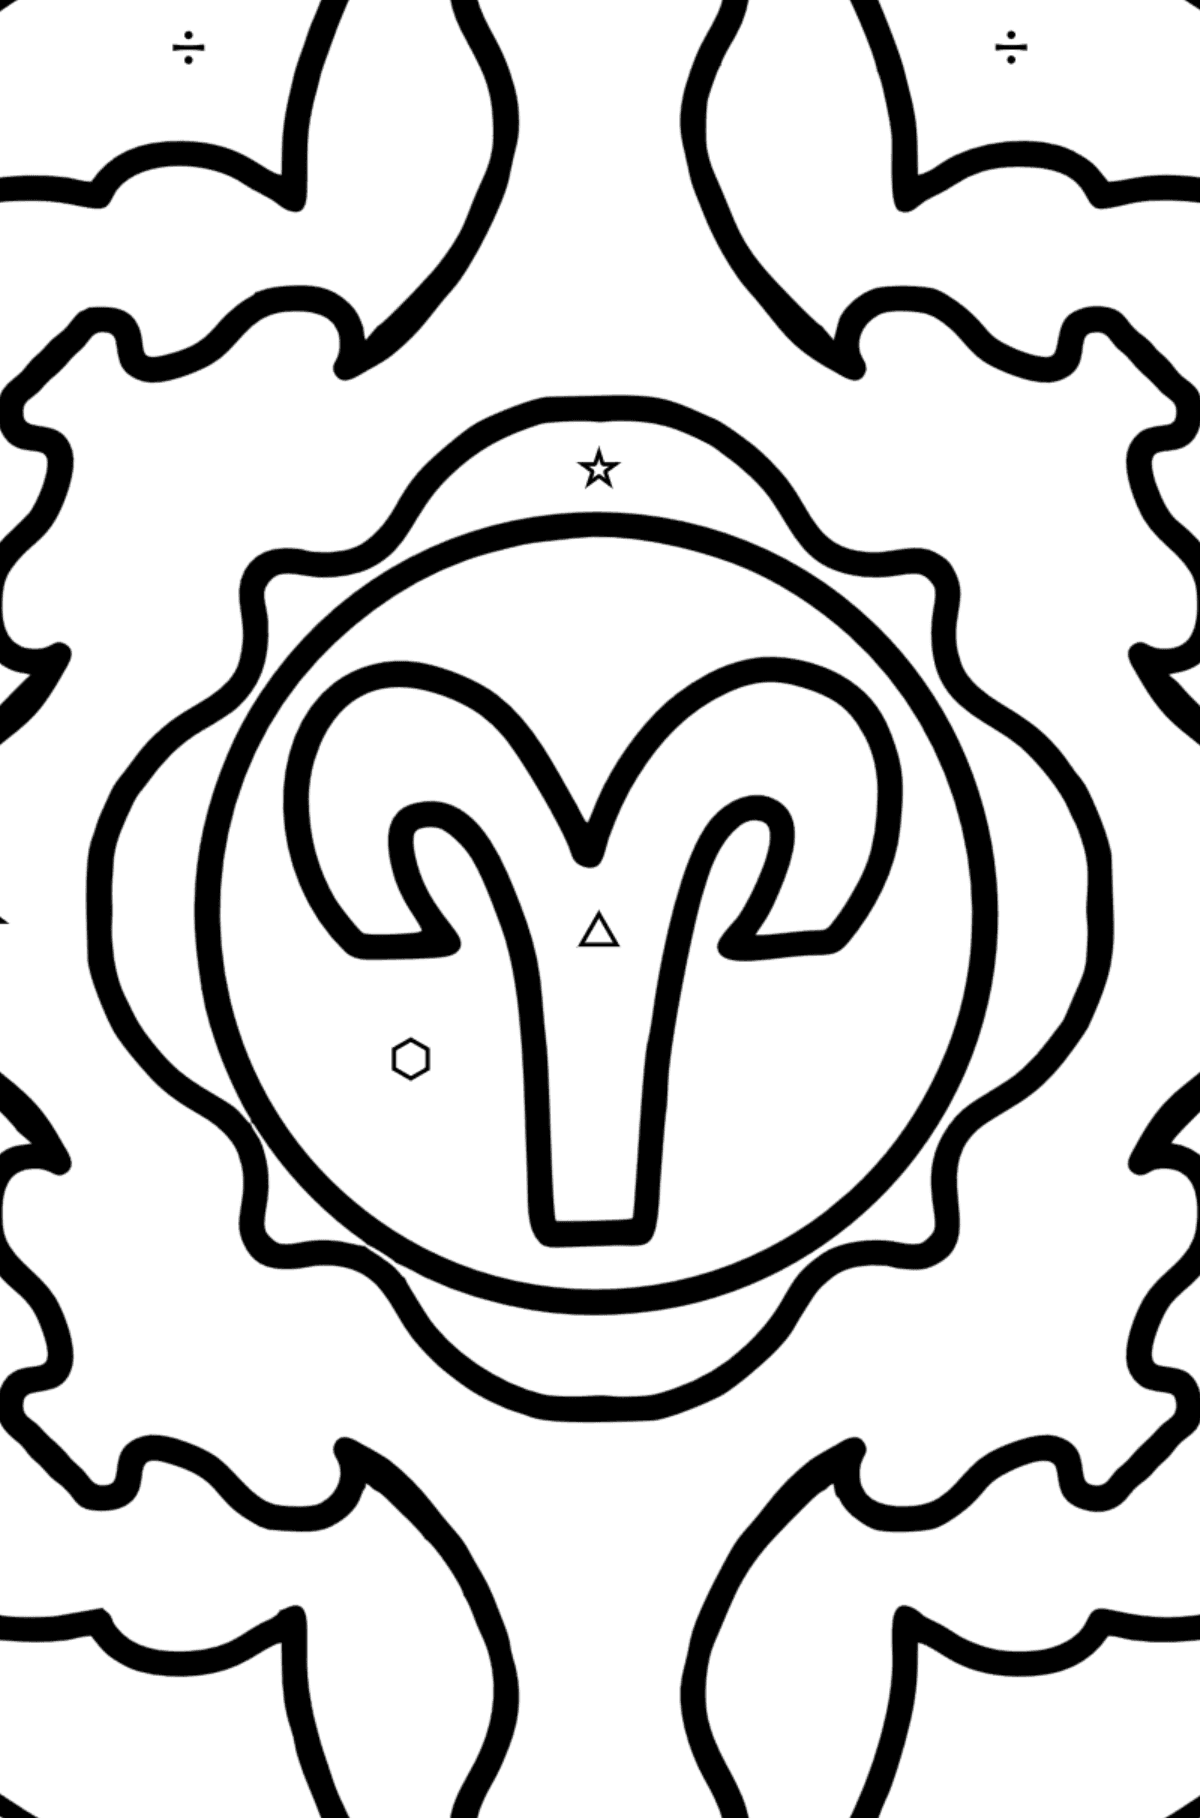 Coloring page - zodiac sign Aries - Coloring by Symbols and Geometric Shapes for Kids